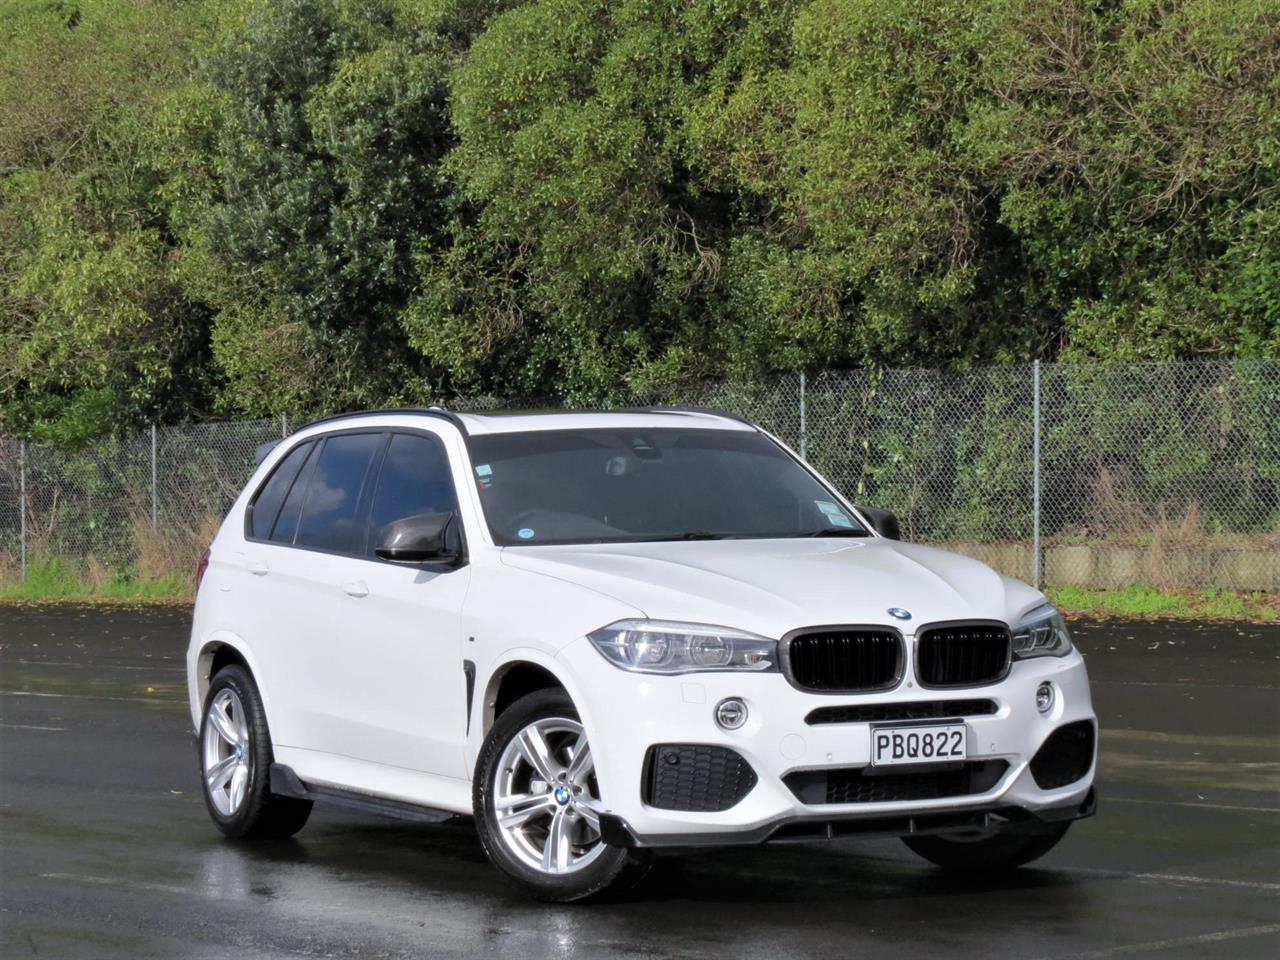 NZC 2014 BMW X5 just arrived to Auckland